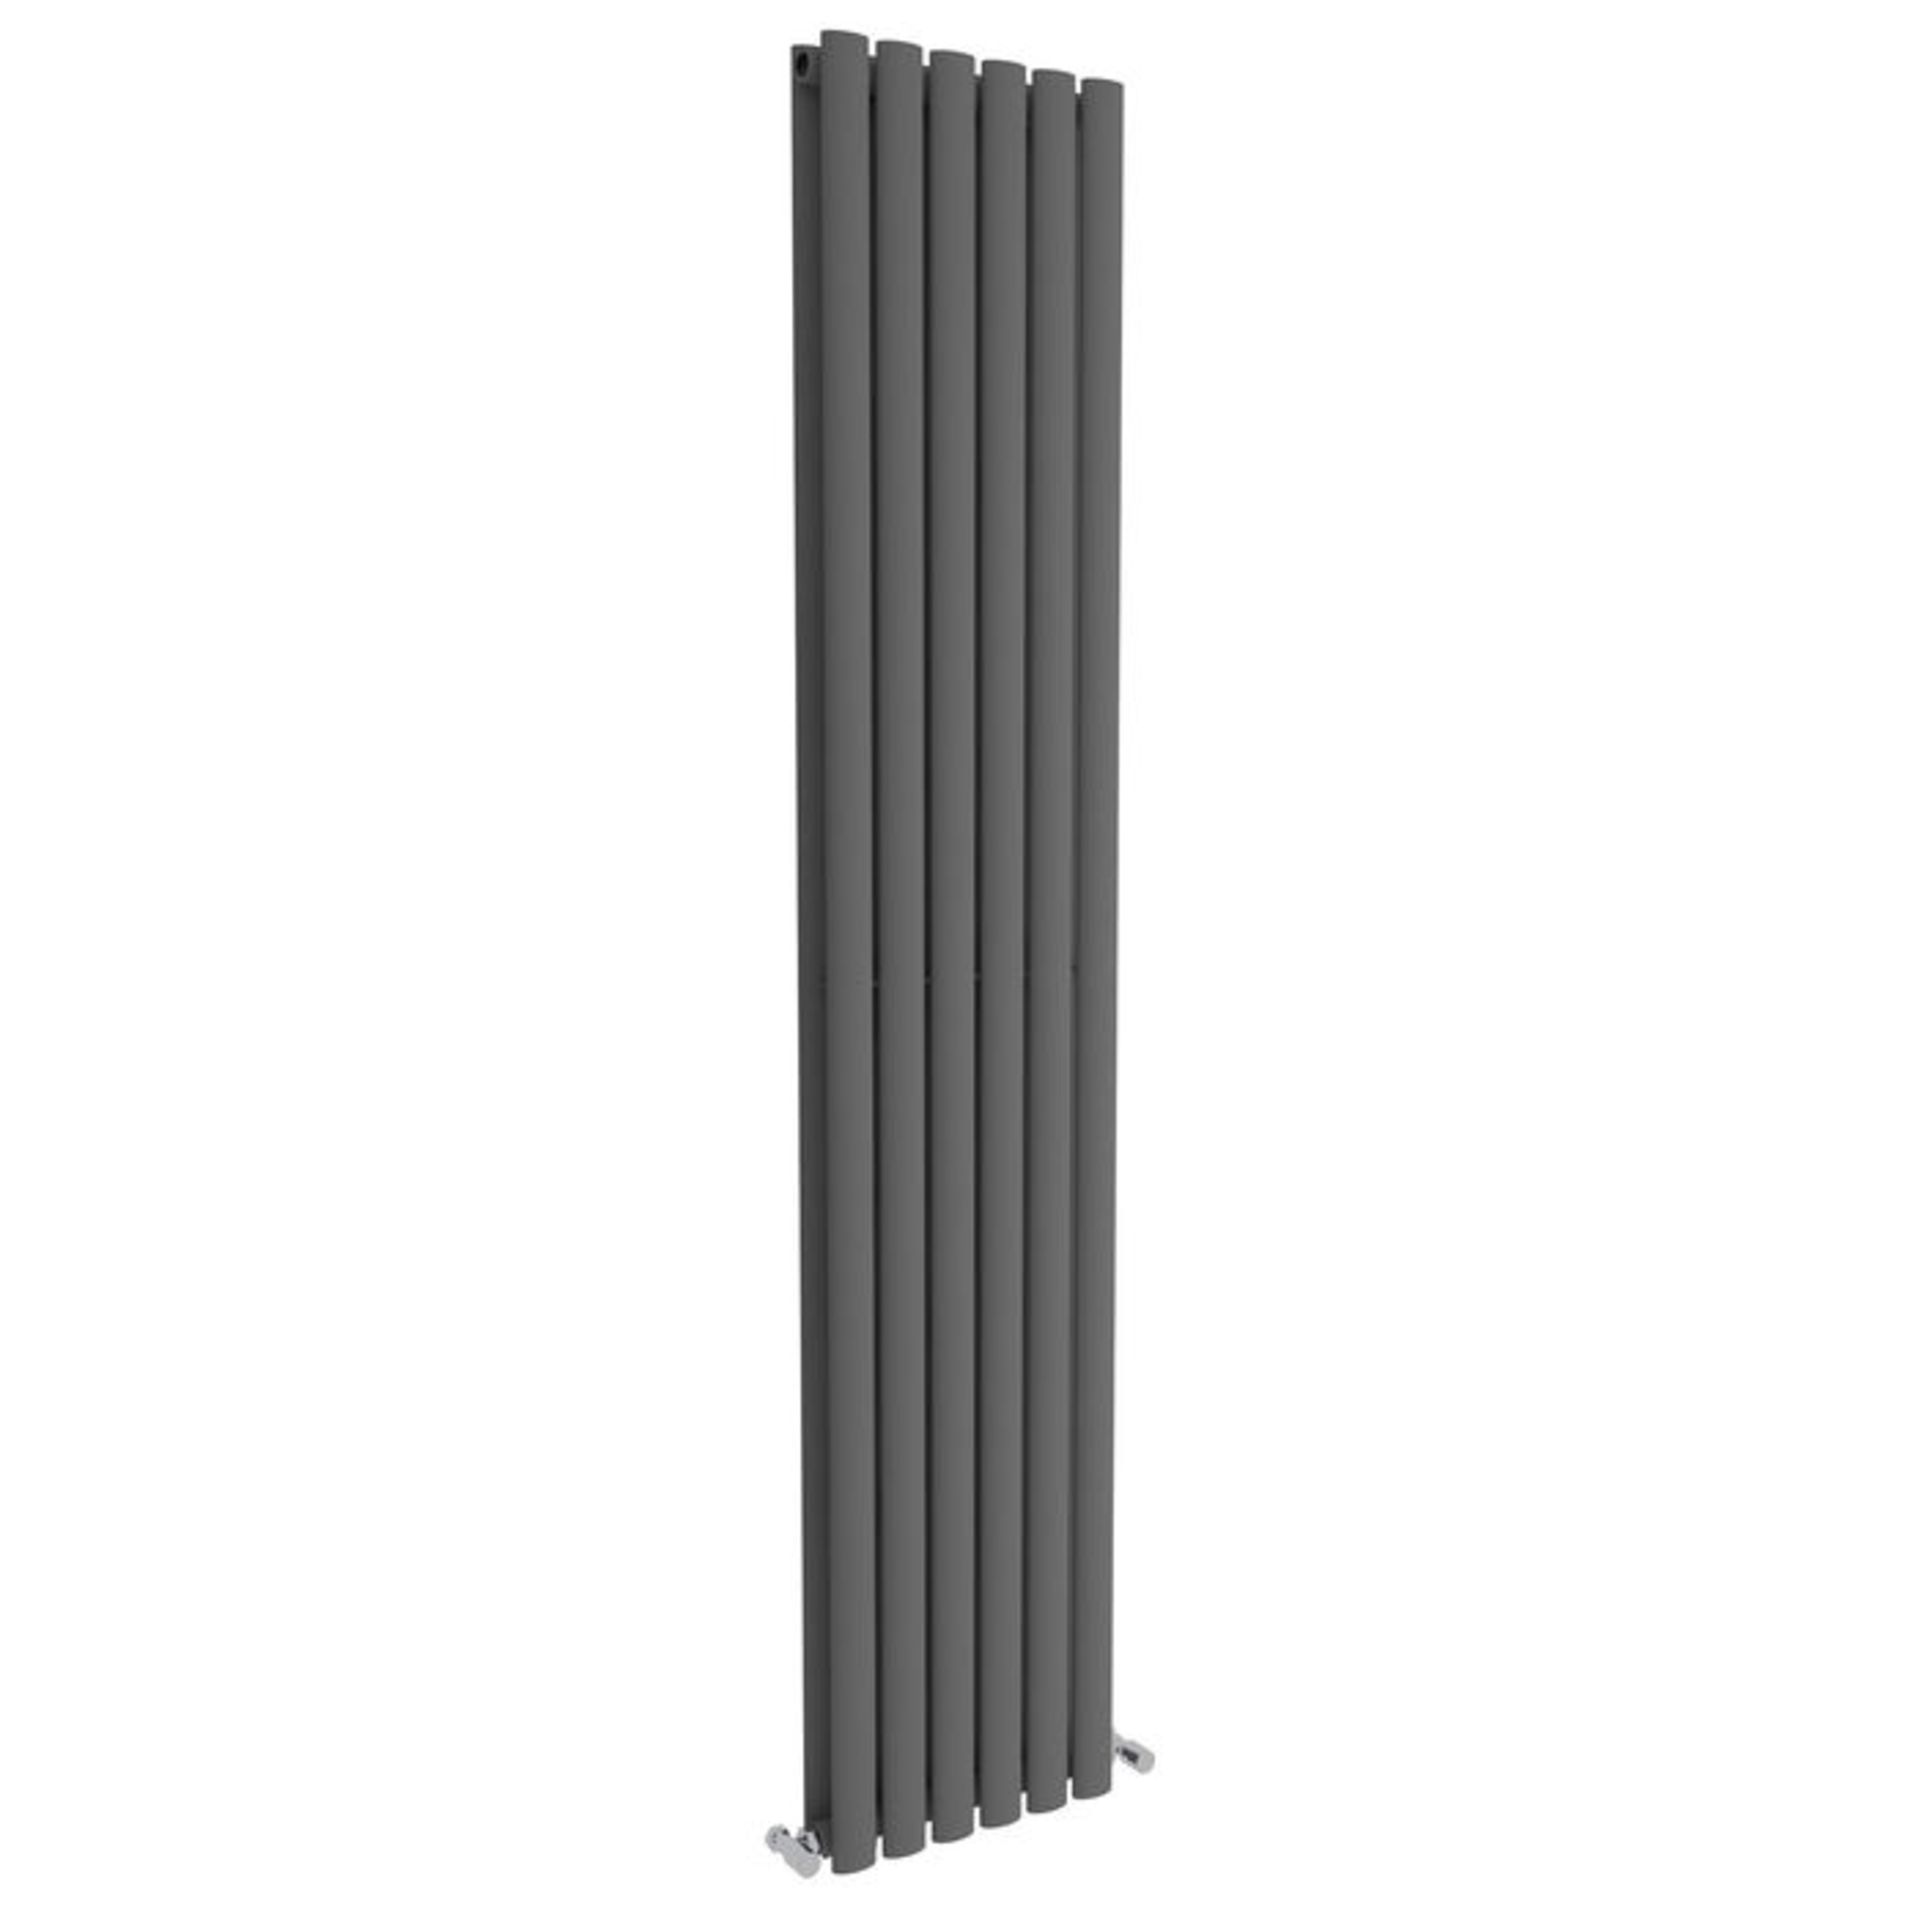 (GR44) 1800x360mm Anthracite Double Oval Tube Vertical Radiator RRP £342.99 Made from high quality